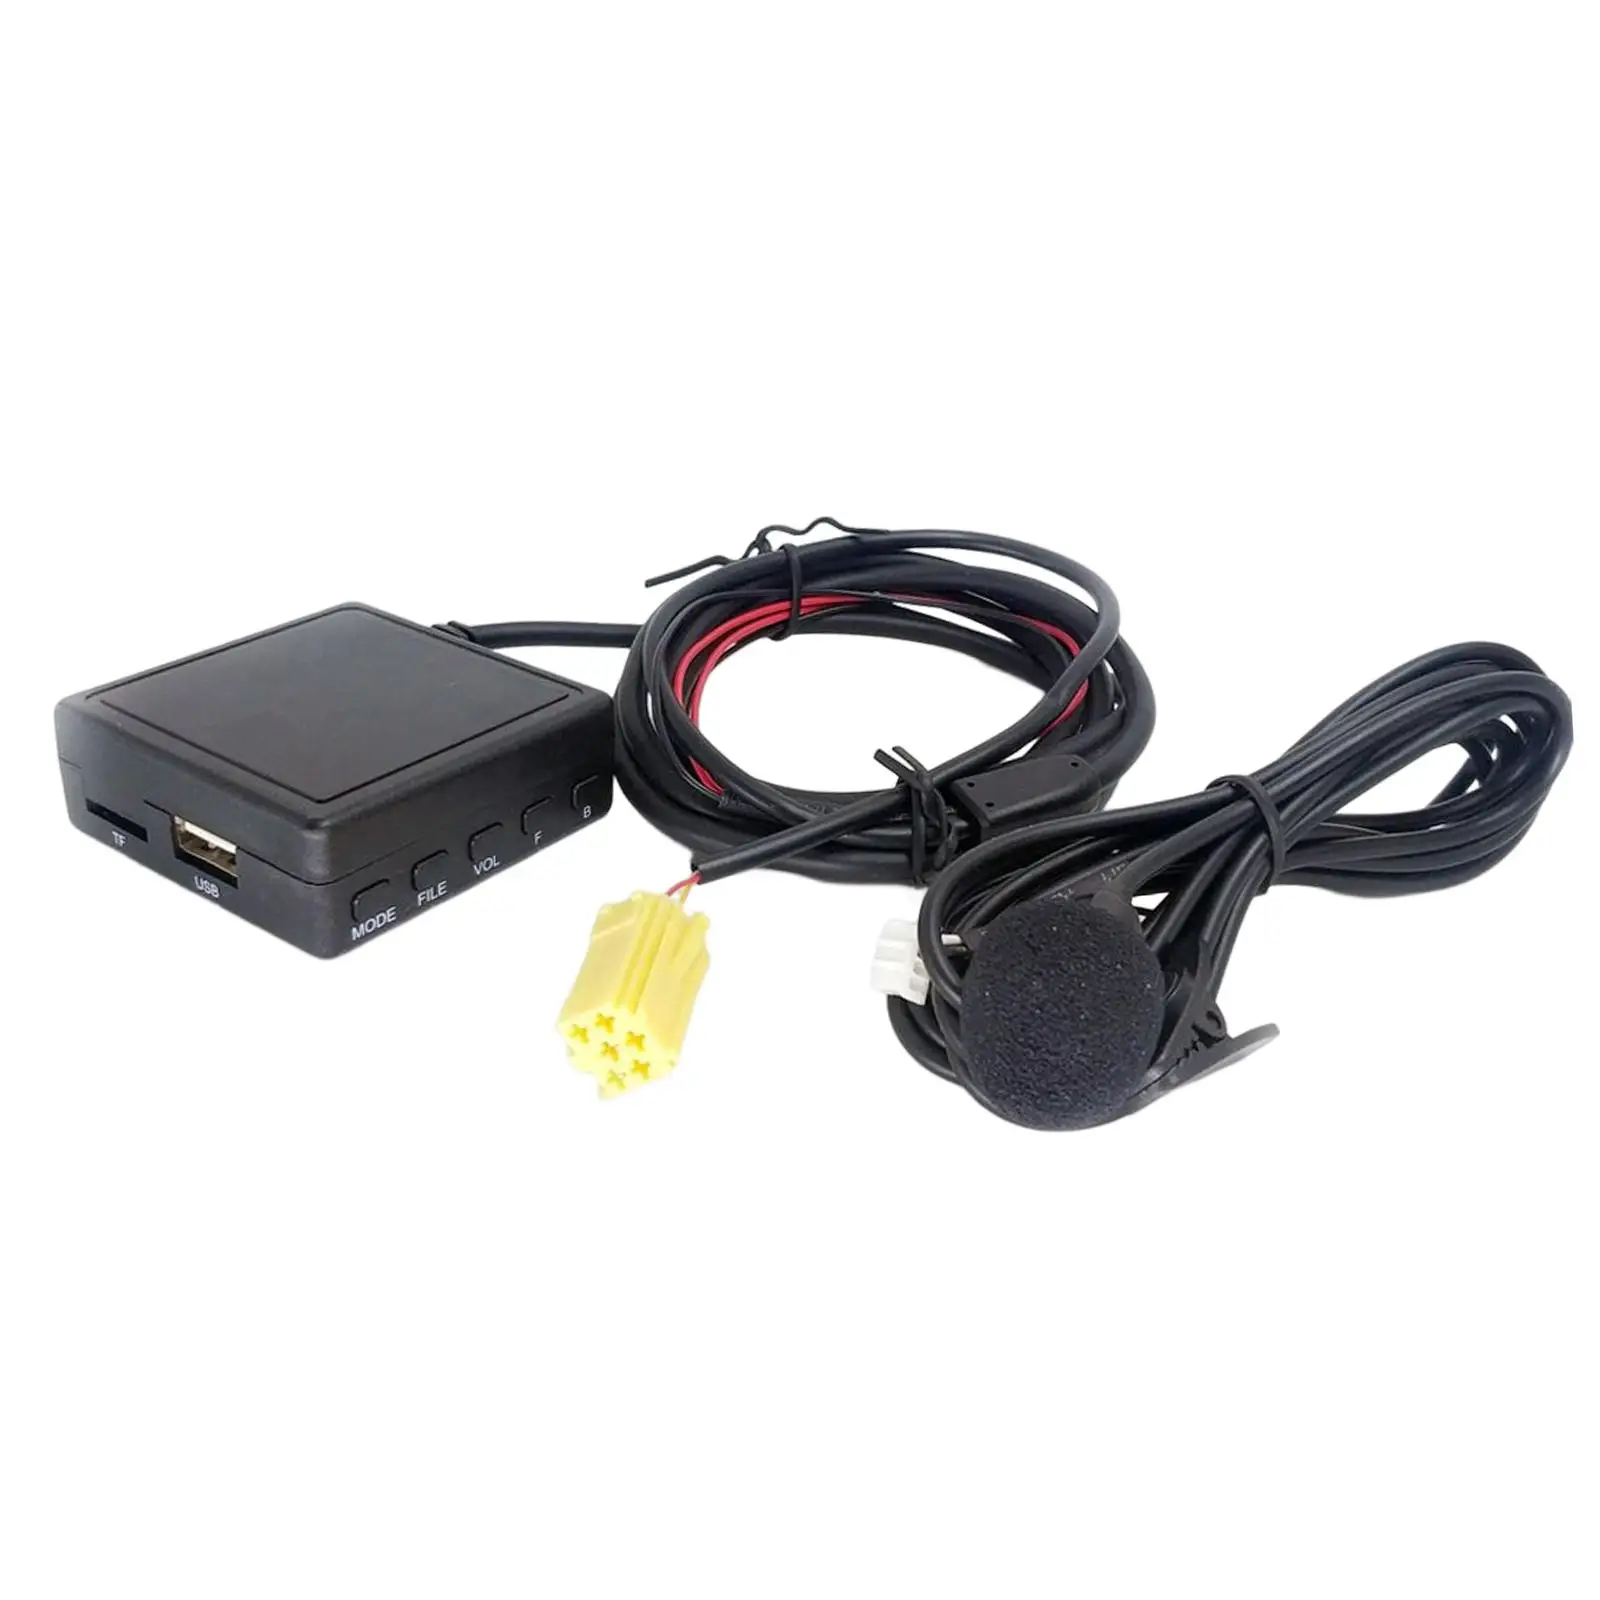 Music Receiver Adapter V5.0 AUX Input 12V Microphone Hands Free for PUNTO 1999 - 2015 (Type 188/199)